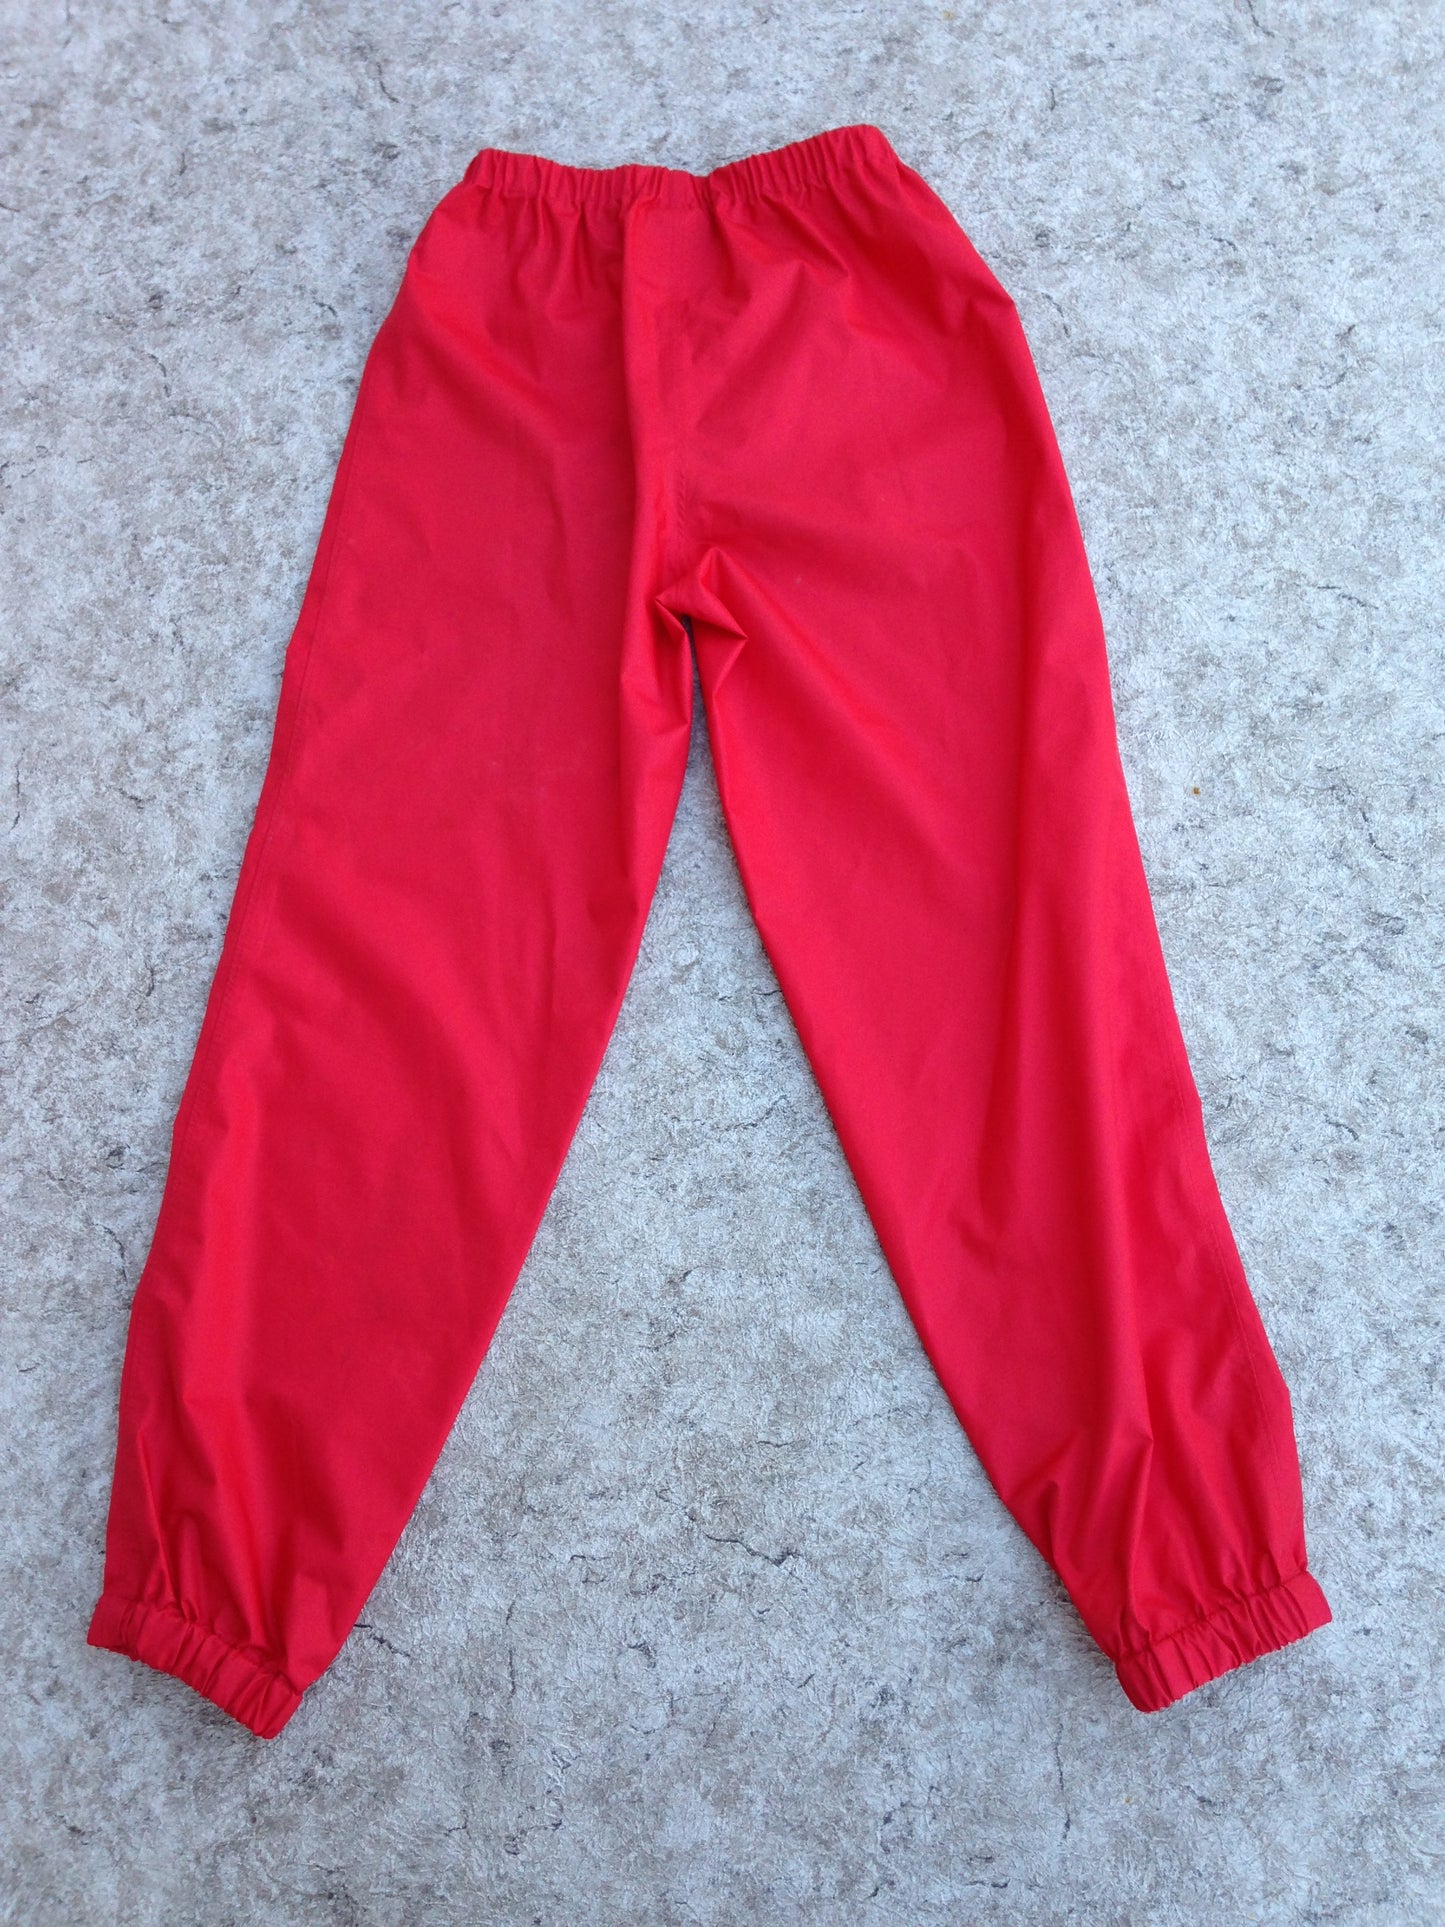 Rain Pants Child Size 14 MEC Youth Red New Demo Model